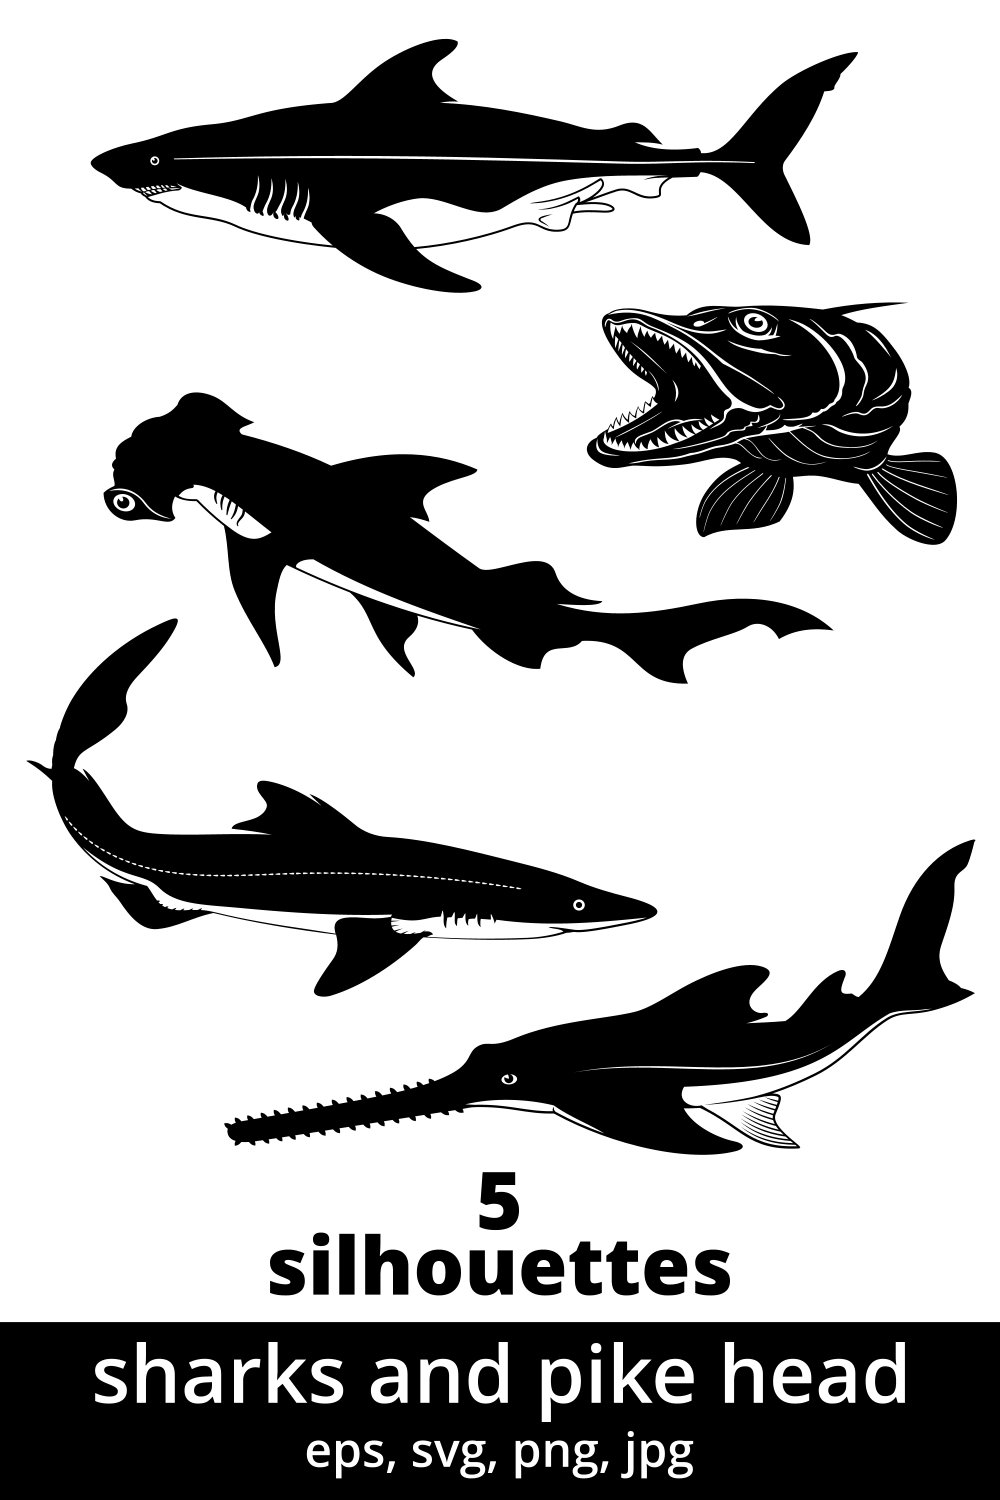 Six silhouettes of sharks and pikes.